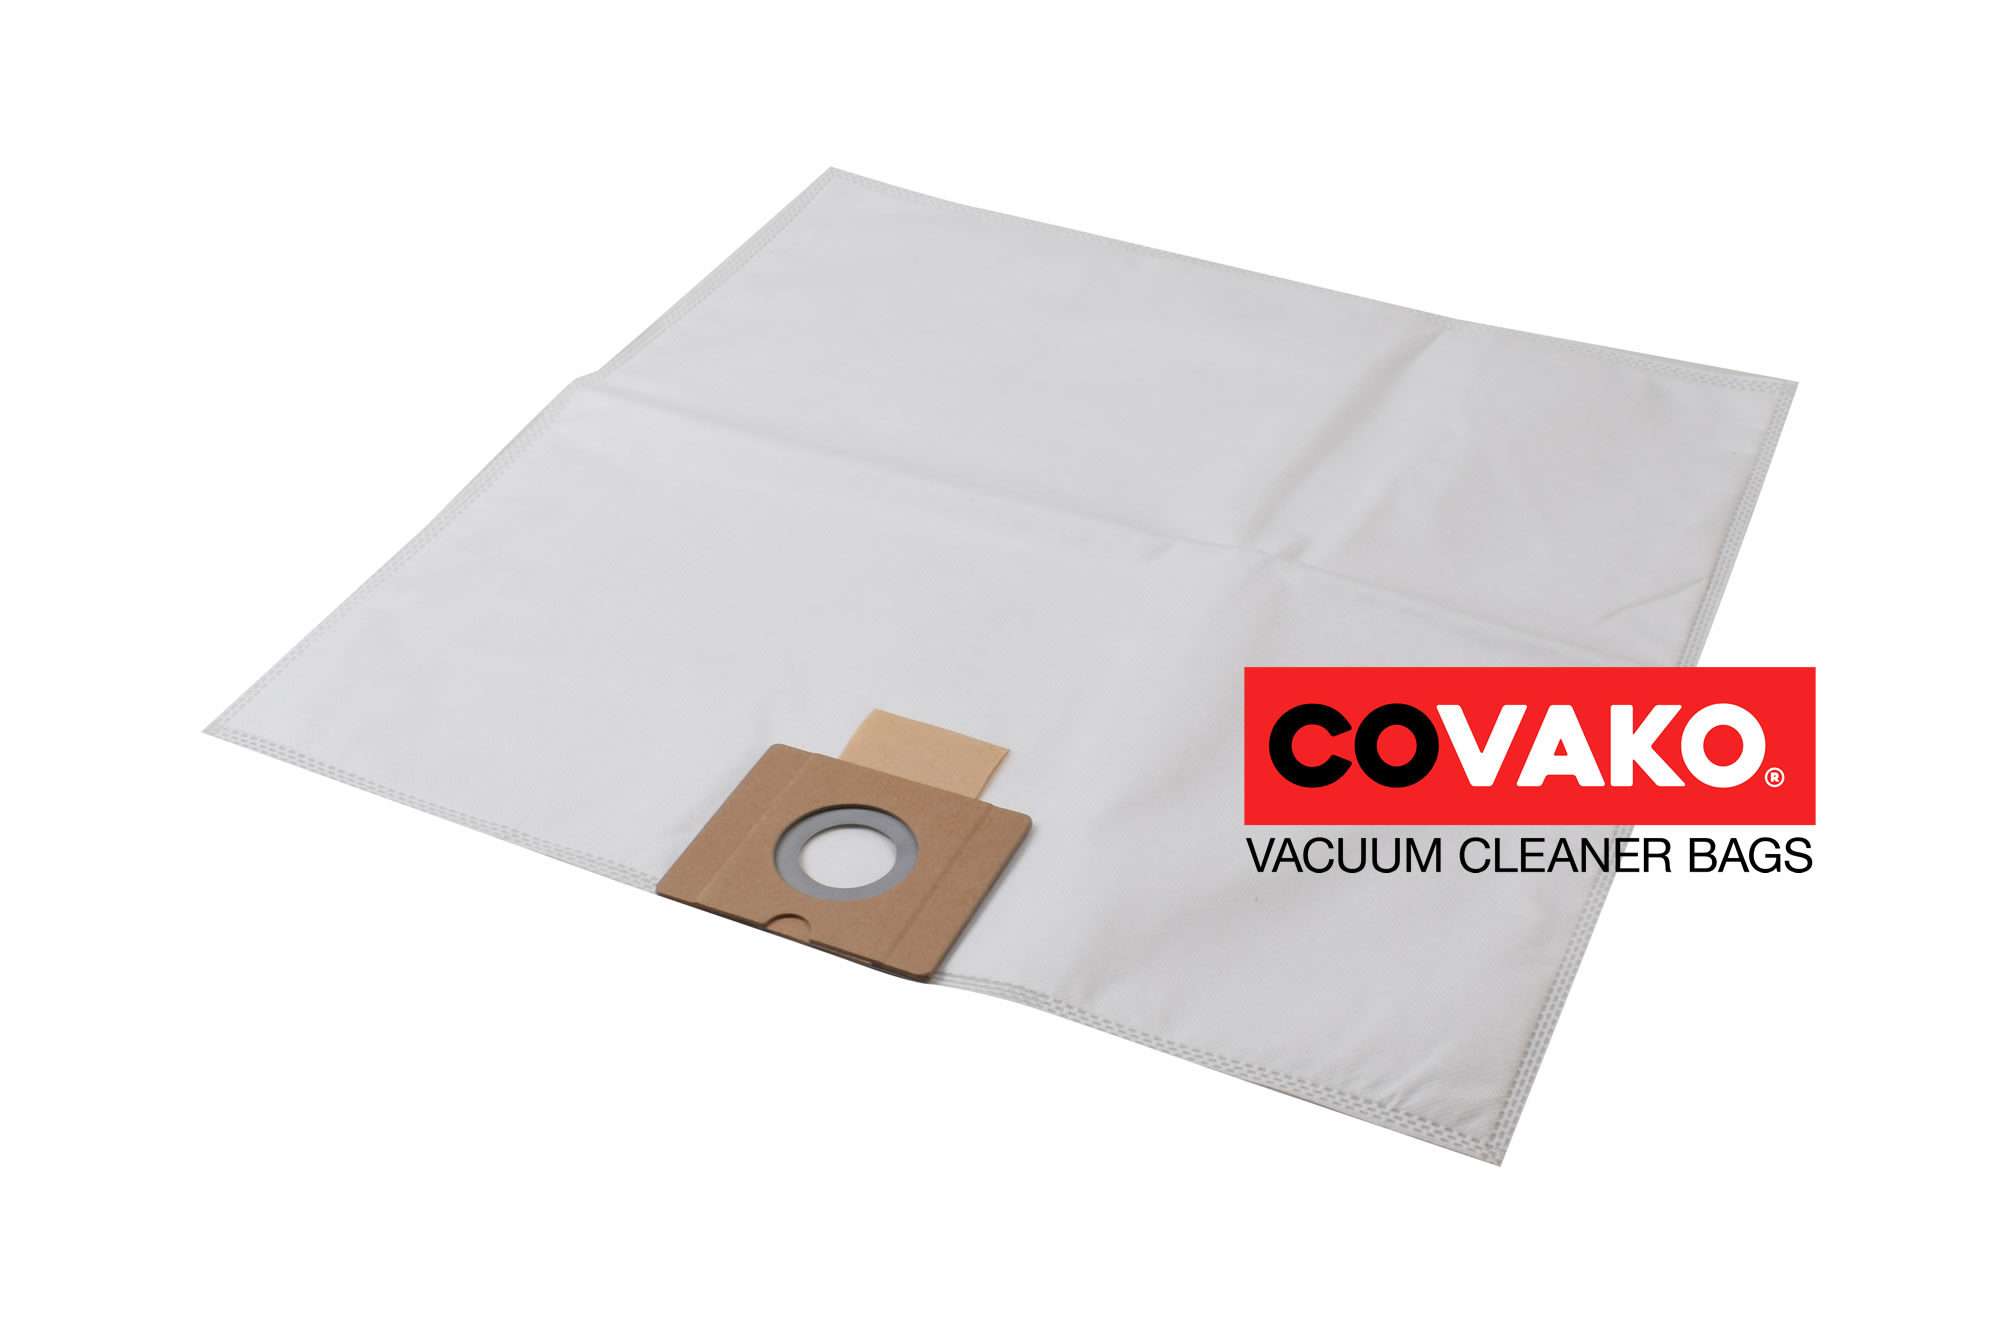 I-vac Cube plus / Synthesis - I-vac vacuum cleaner bags